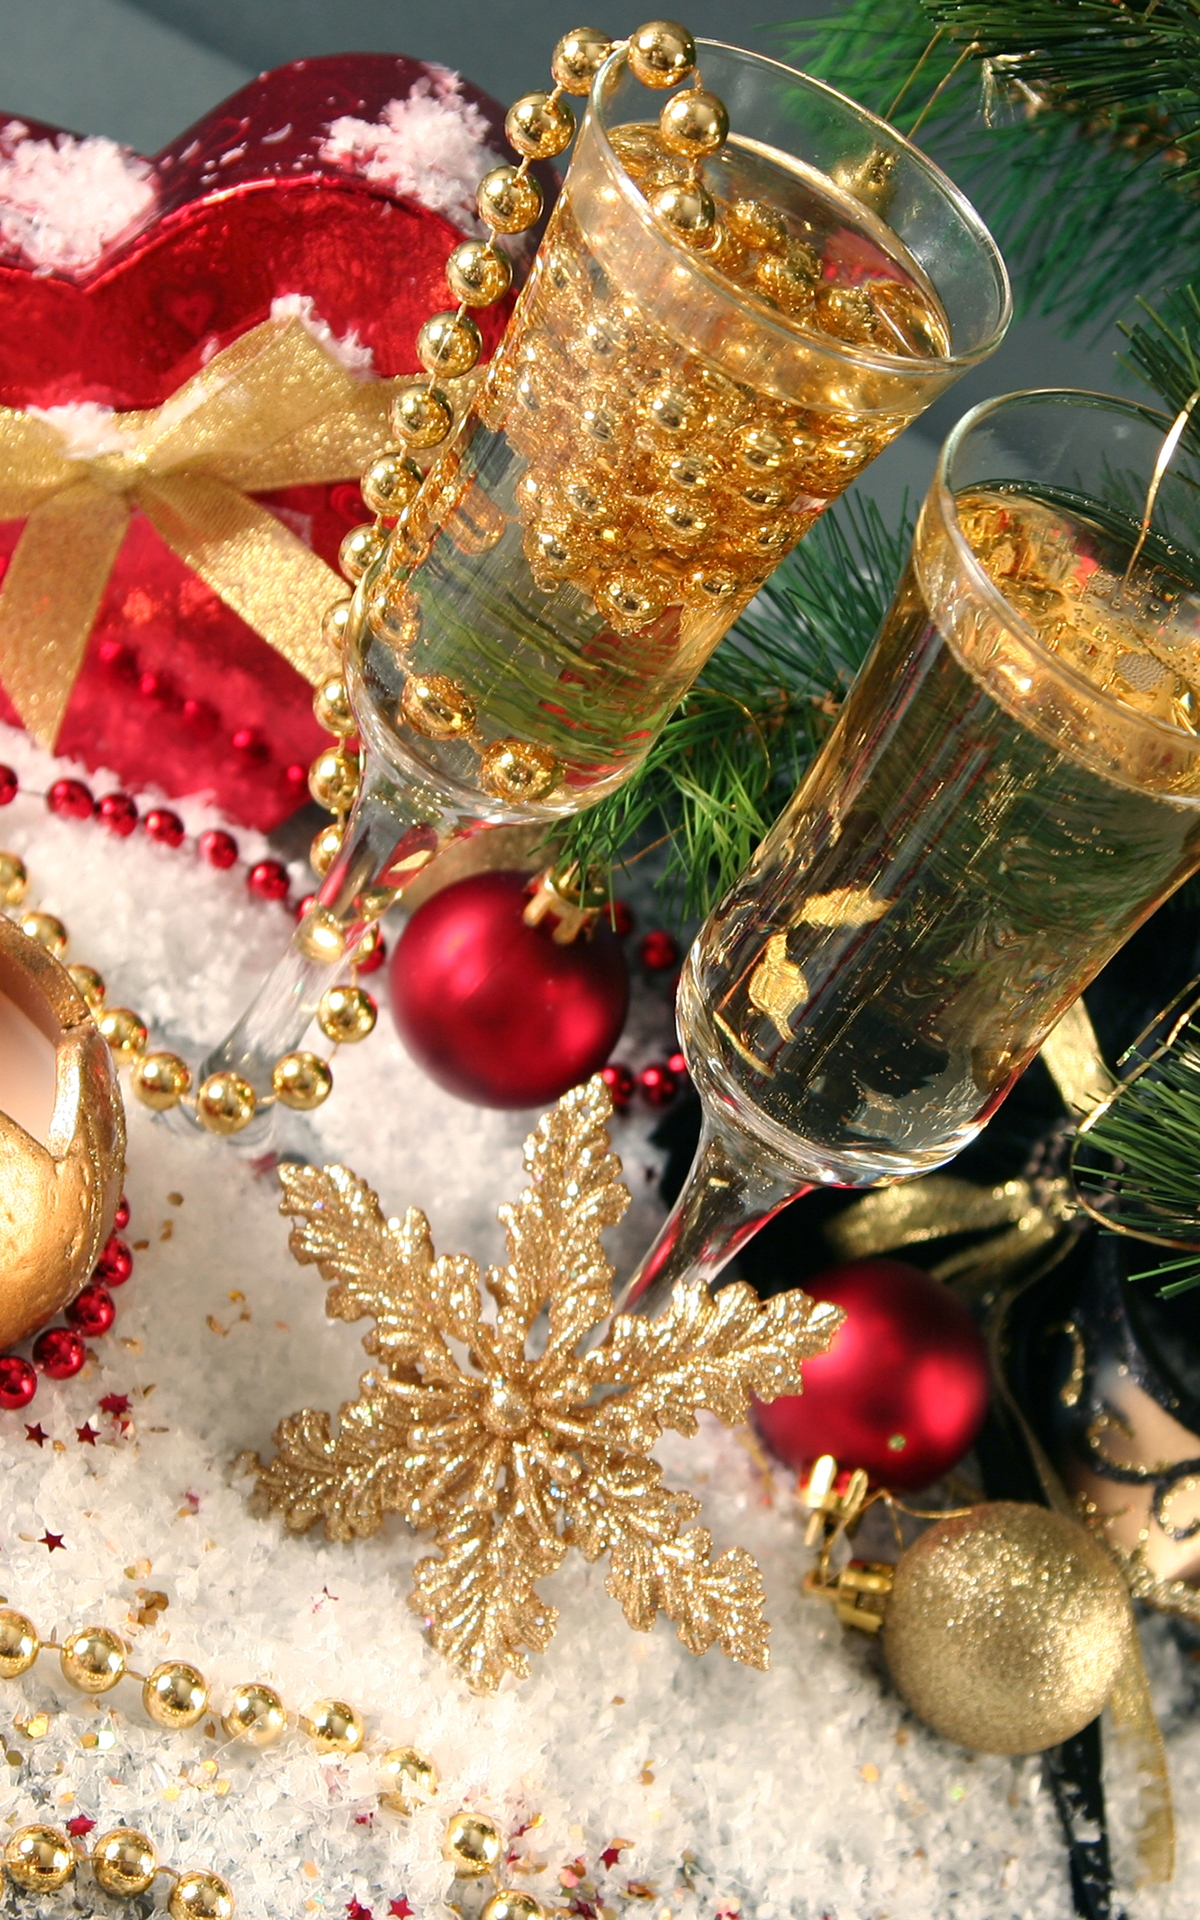 Image: New year, Christmas, holiday, wine glasses, beads, snowflakes, candle, toys, mask, branches, fir-tree, heart, gift, box